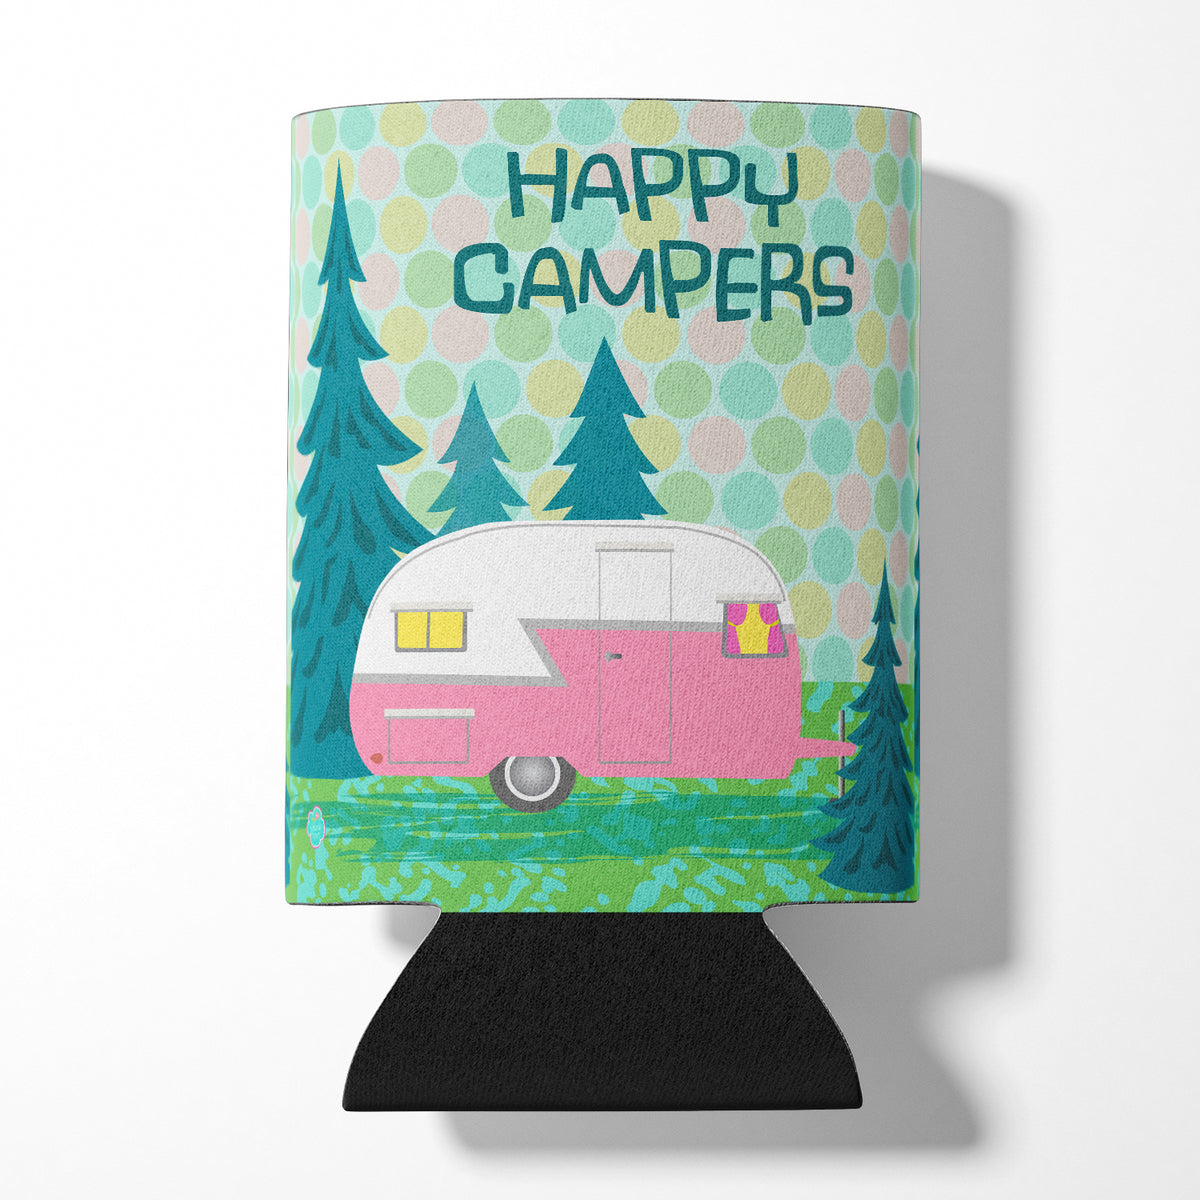 Happy Campers Glamping Trailer Can or Bottle Hugger VHA3004CC.